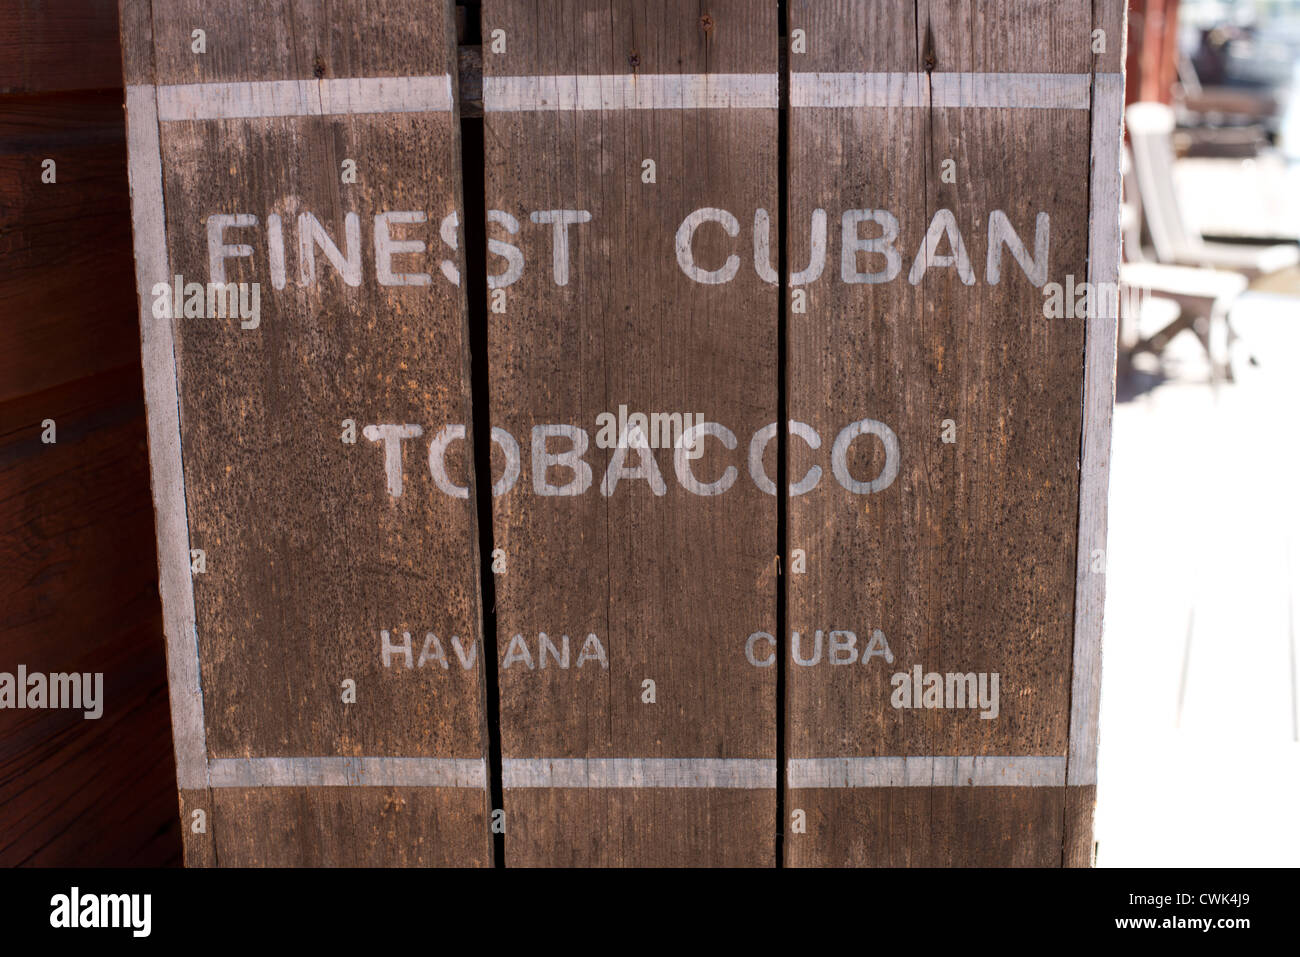 Chest of Finest Cuban Tobacco out front a red wooden house Stock Photo